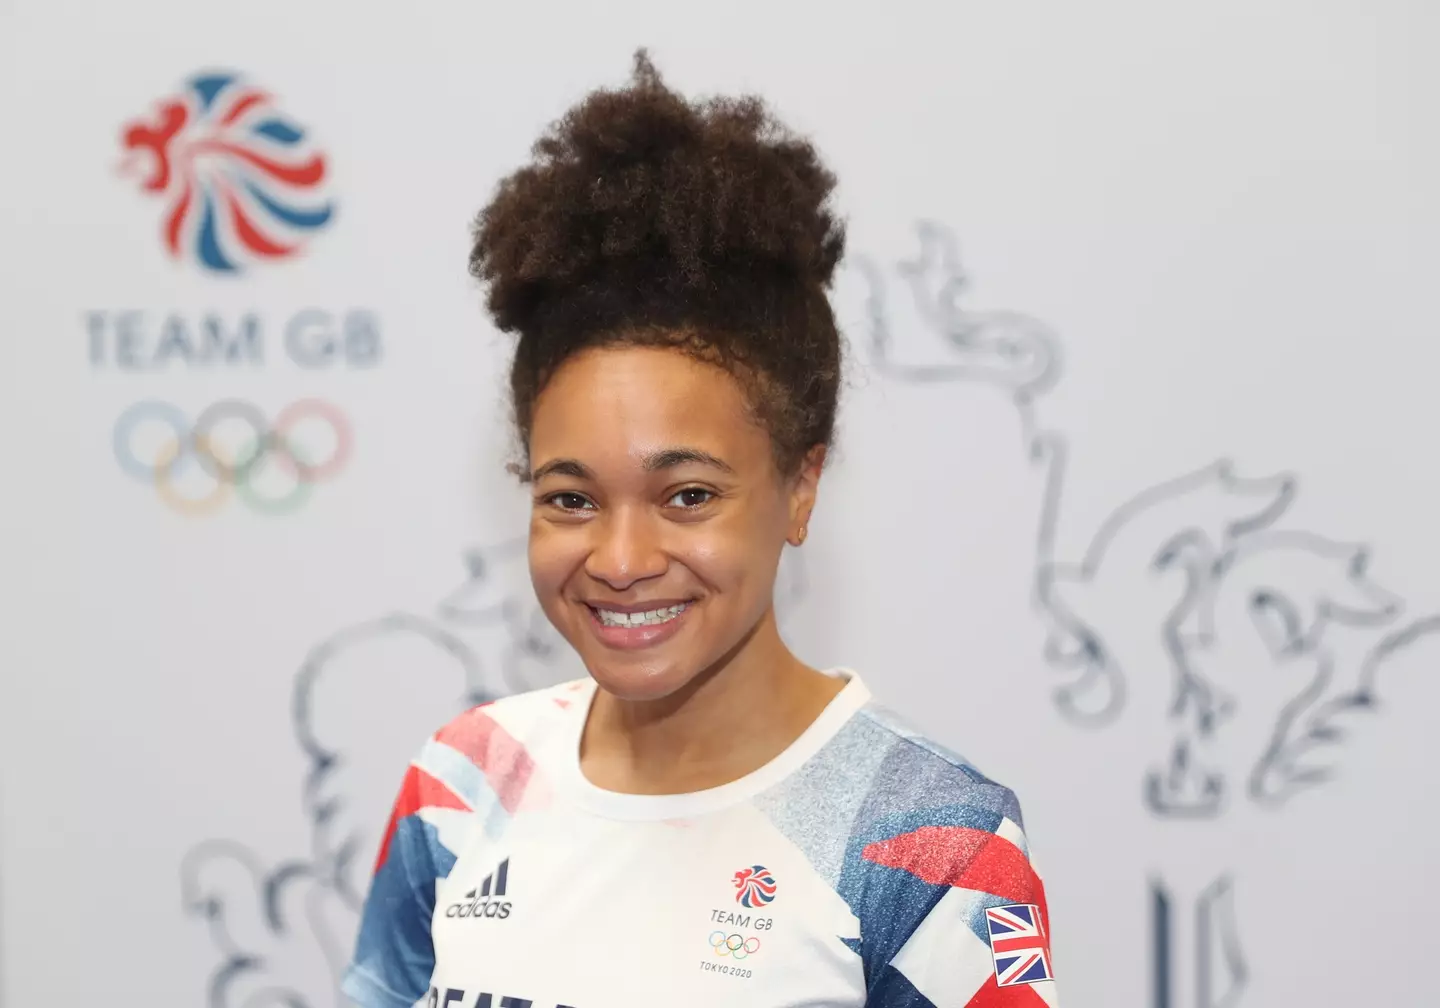 Alice is the first black female swimmer for the UK (